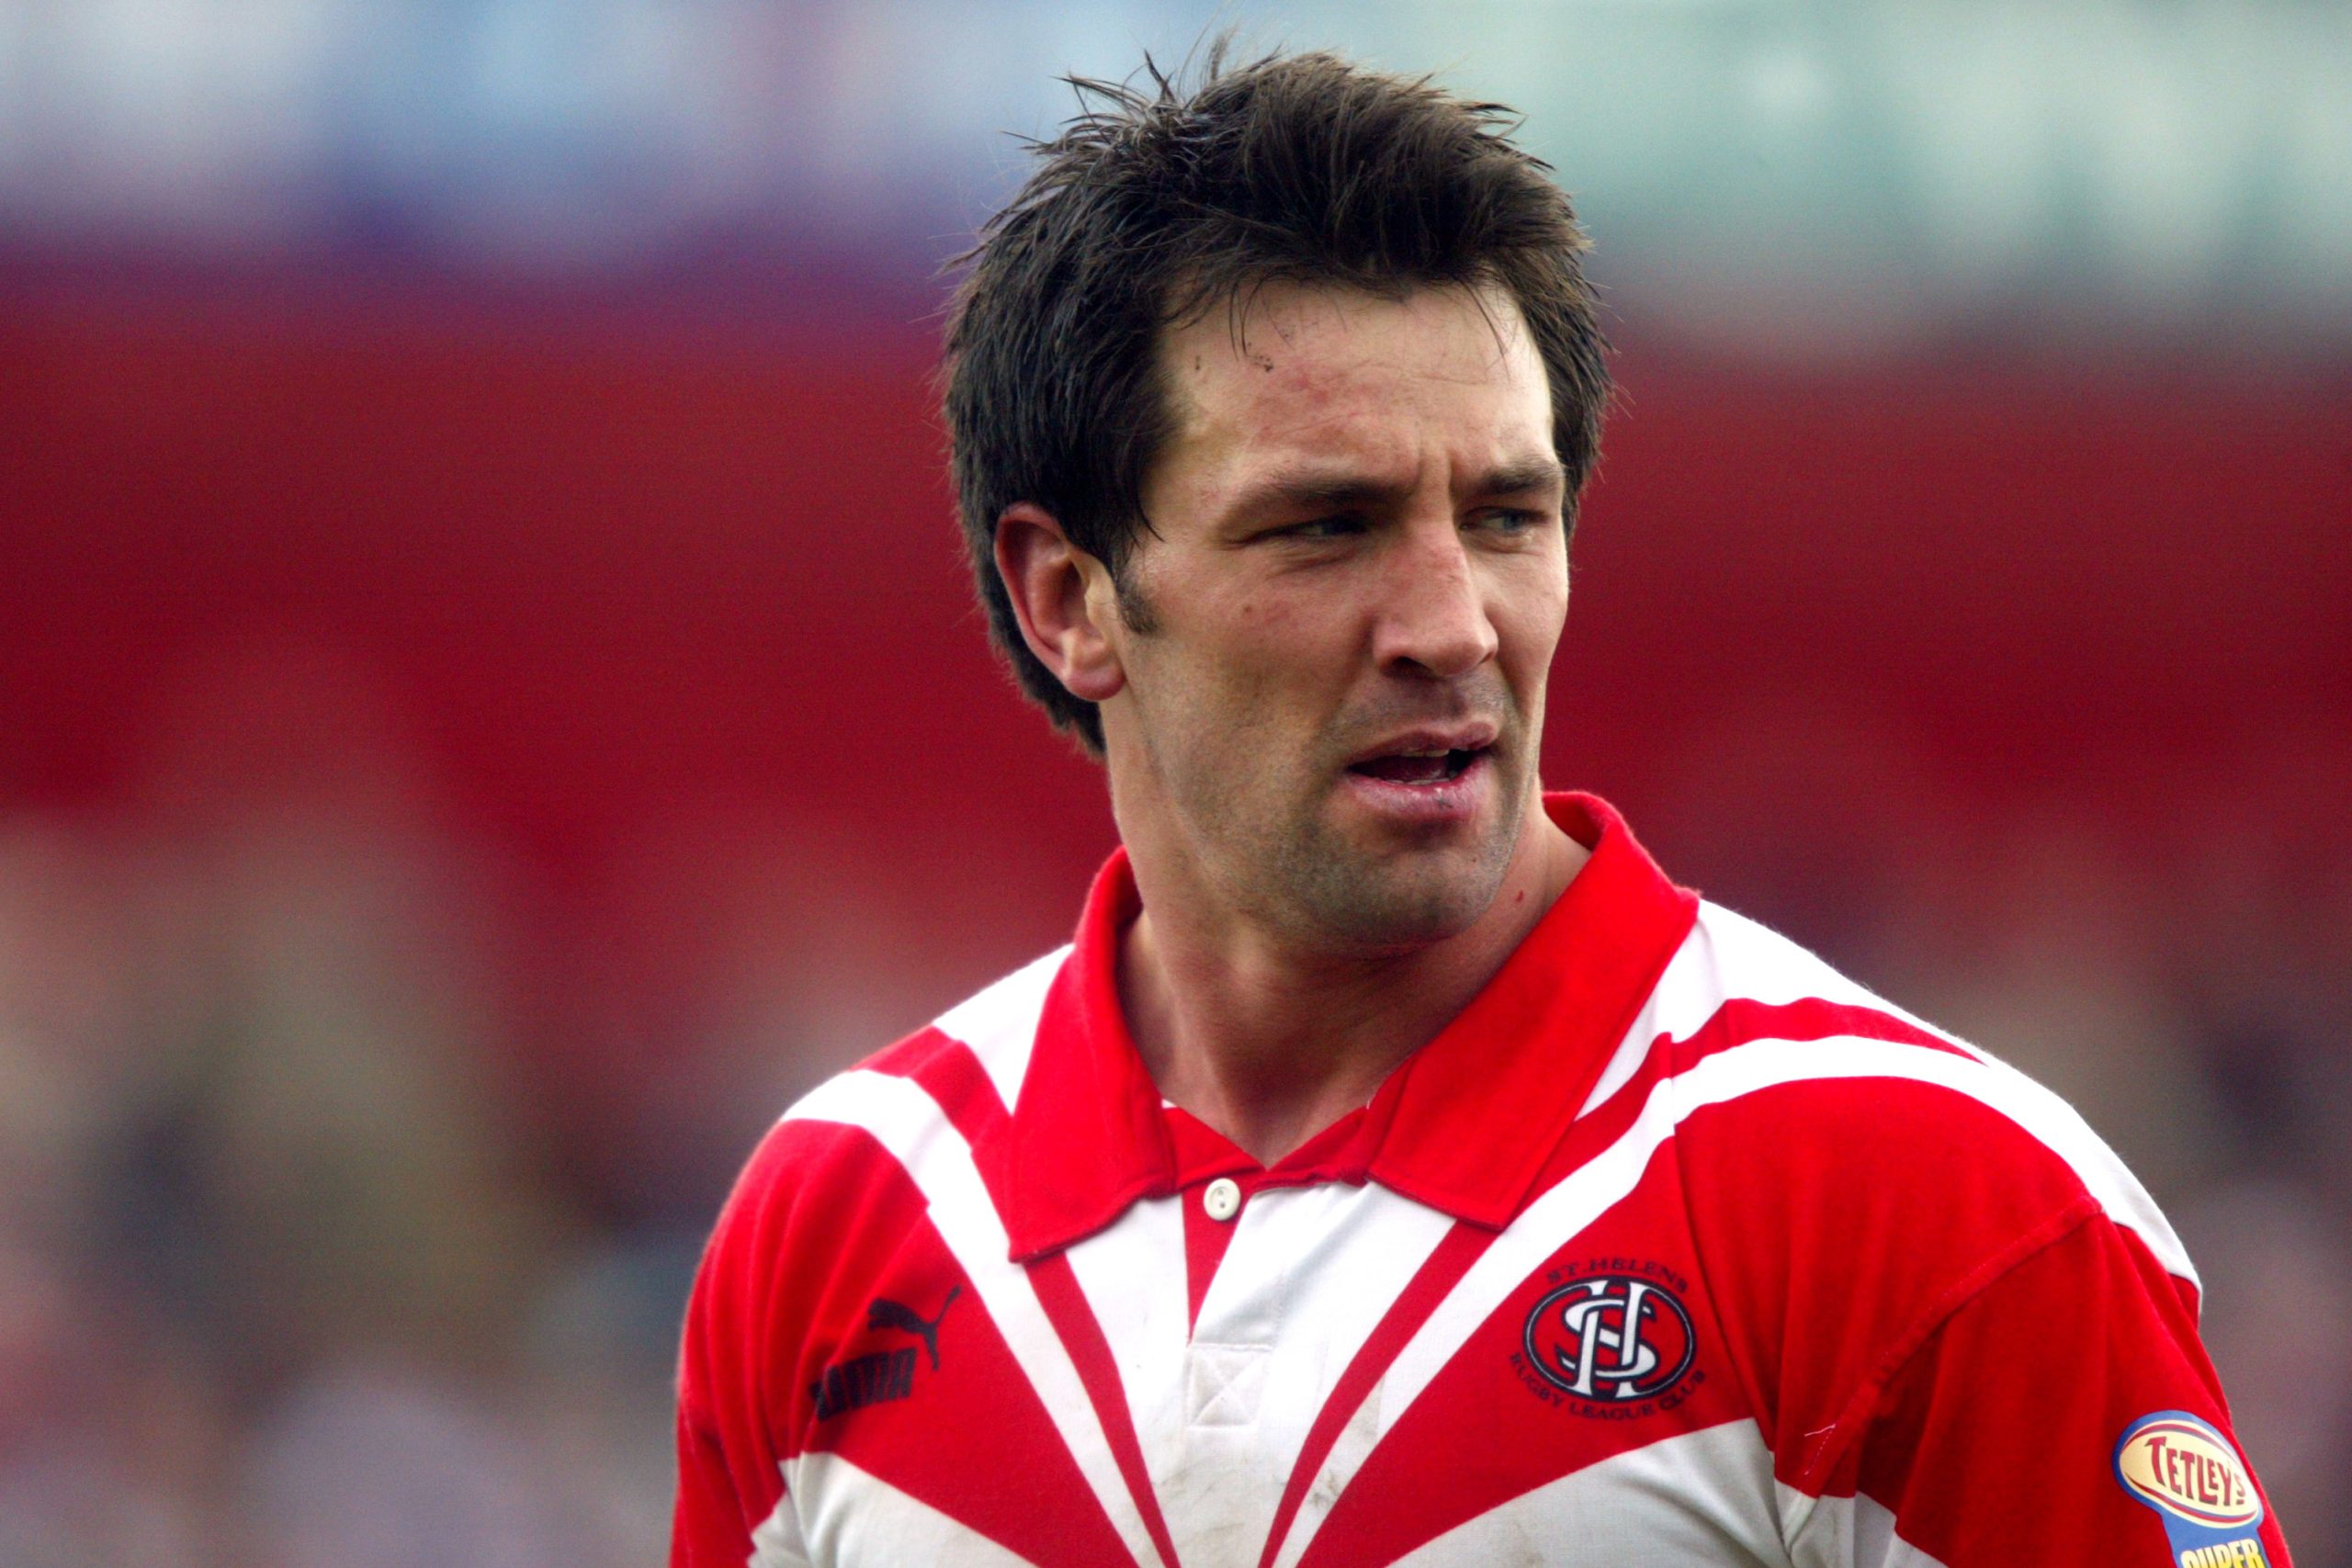 Paul Sculthorpe feels St Helens can topple Penrith if they play at their best